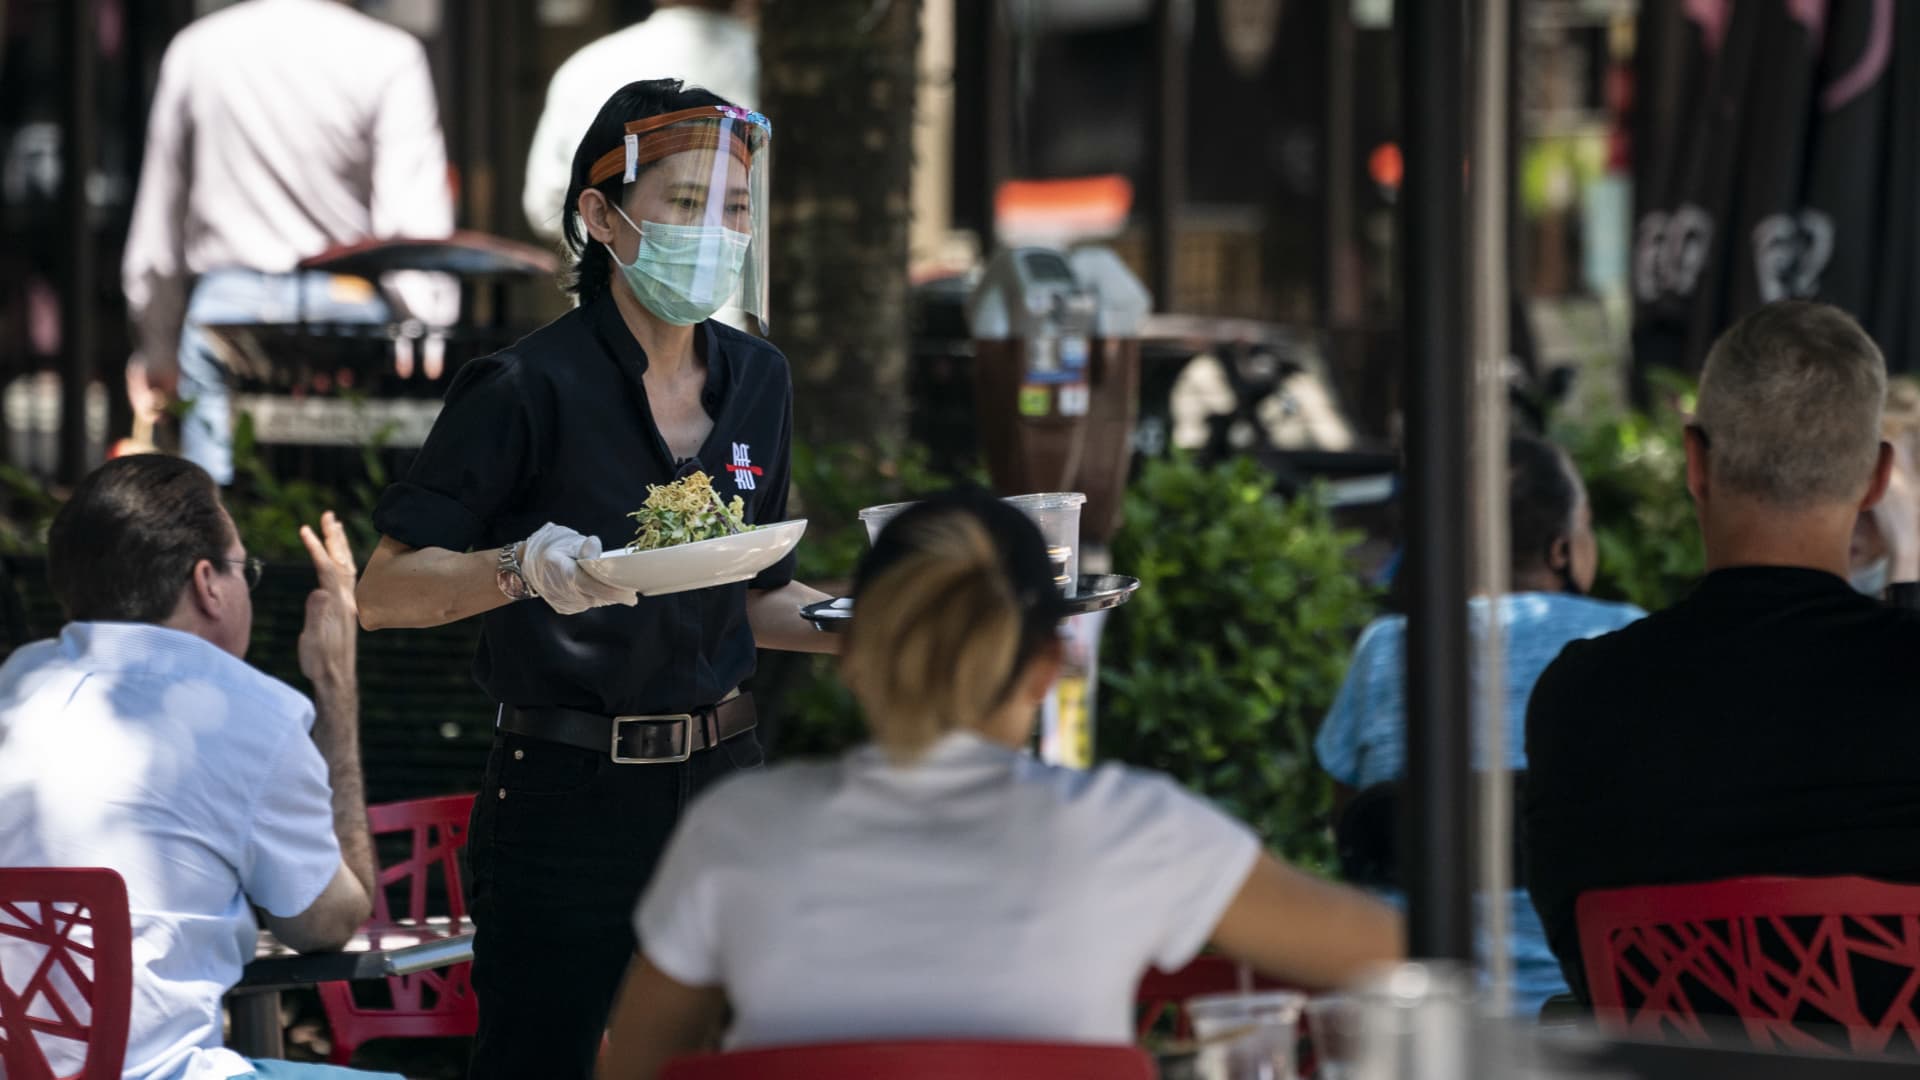 A waiter at Raku, an Asian restaurant in Bethesda, wears a protective face mask as serve customers outdoors amid the coronavirus pandemic on June 12, 2020 in Bethesda, Maryland.